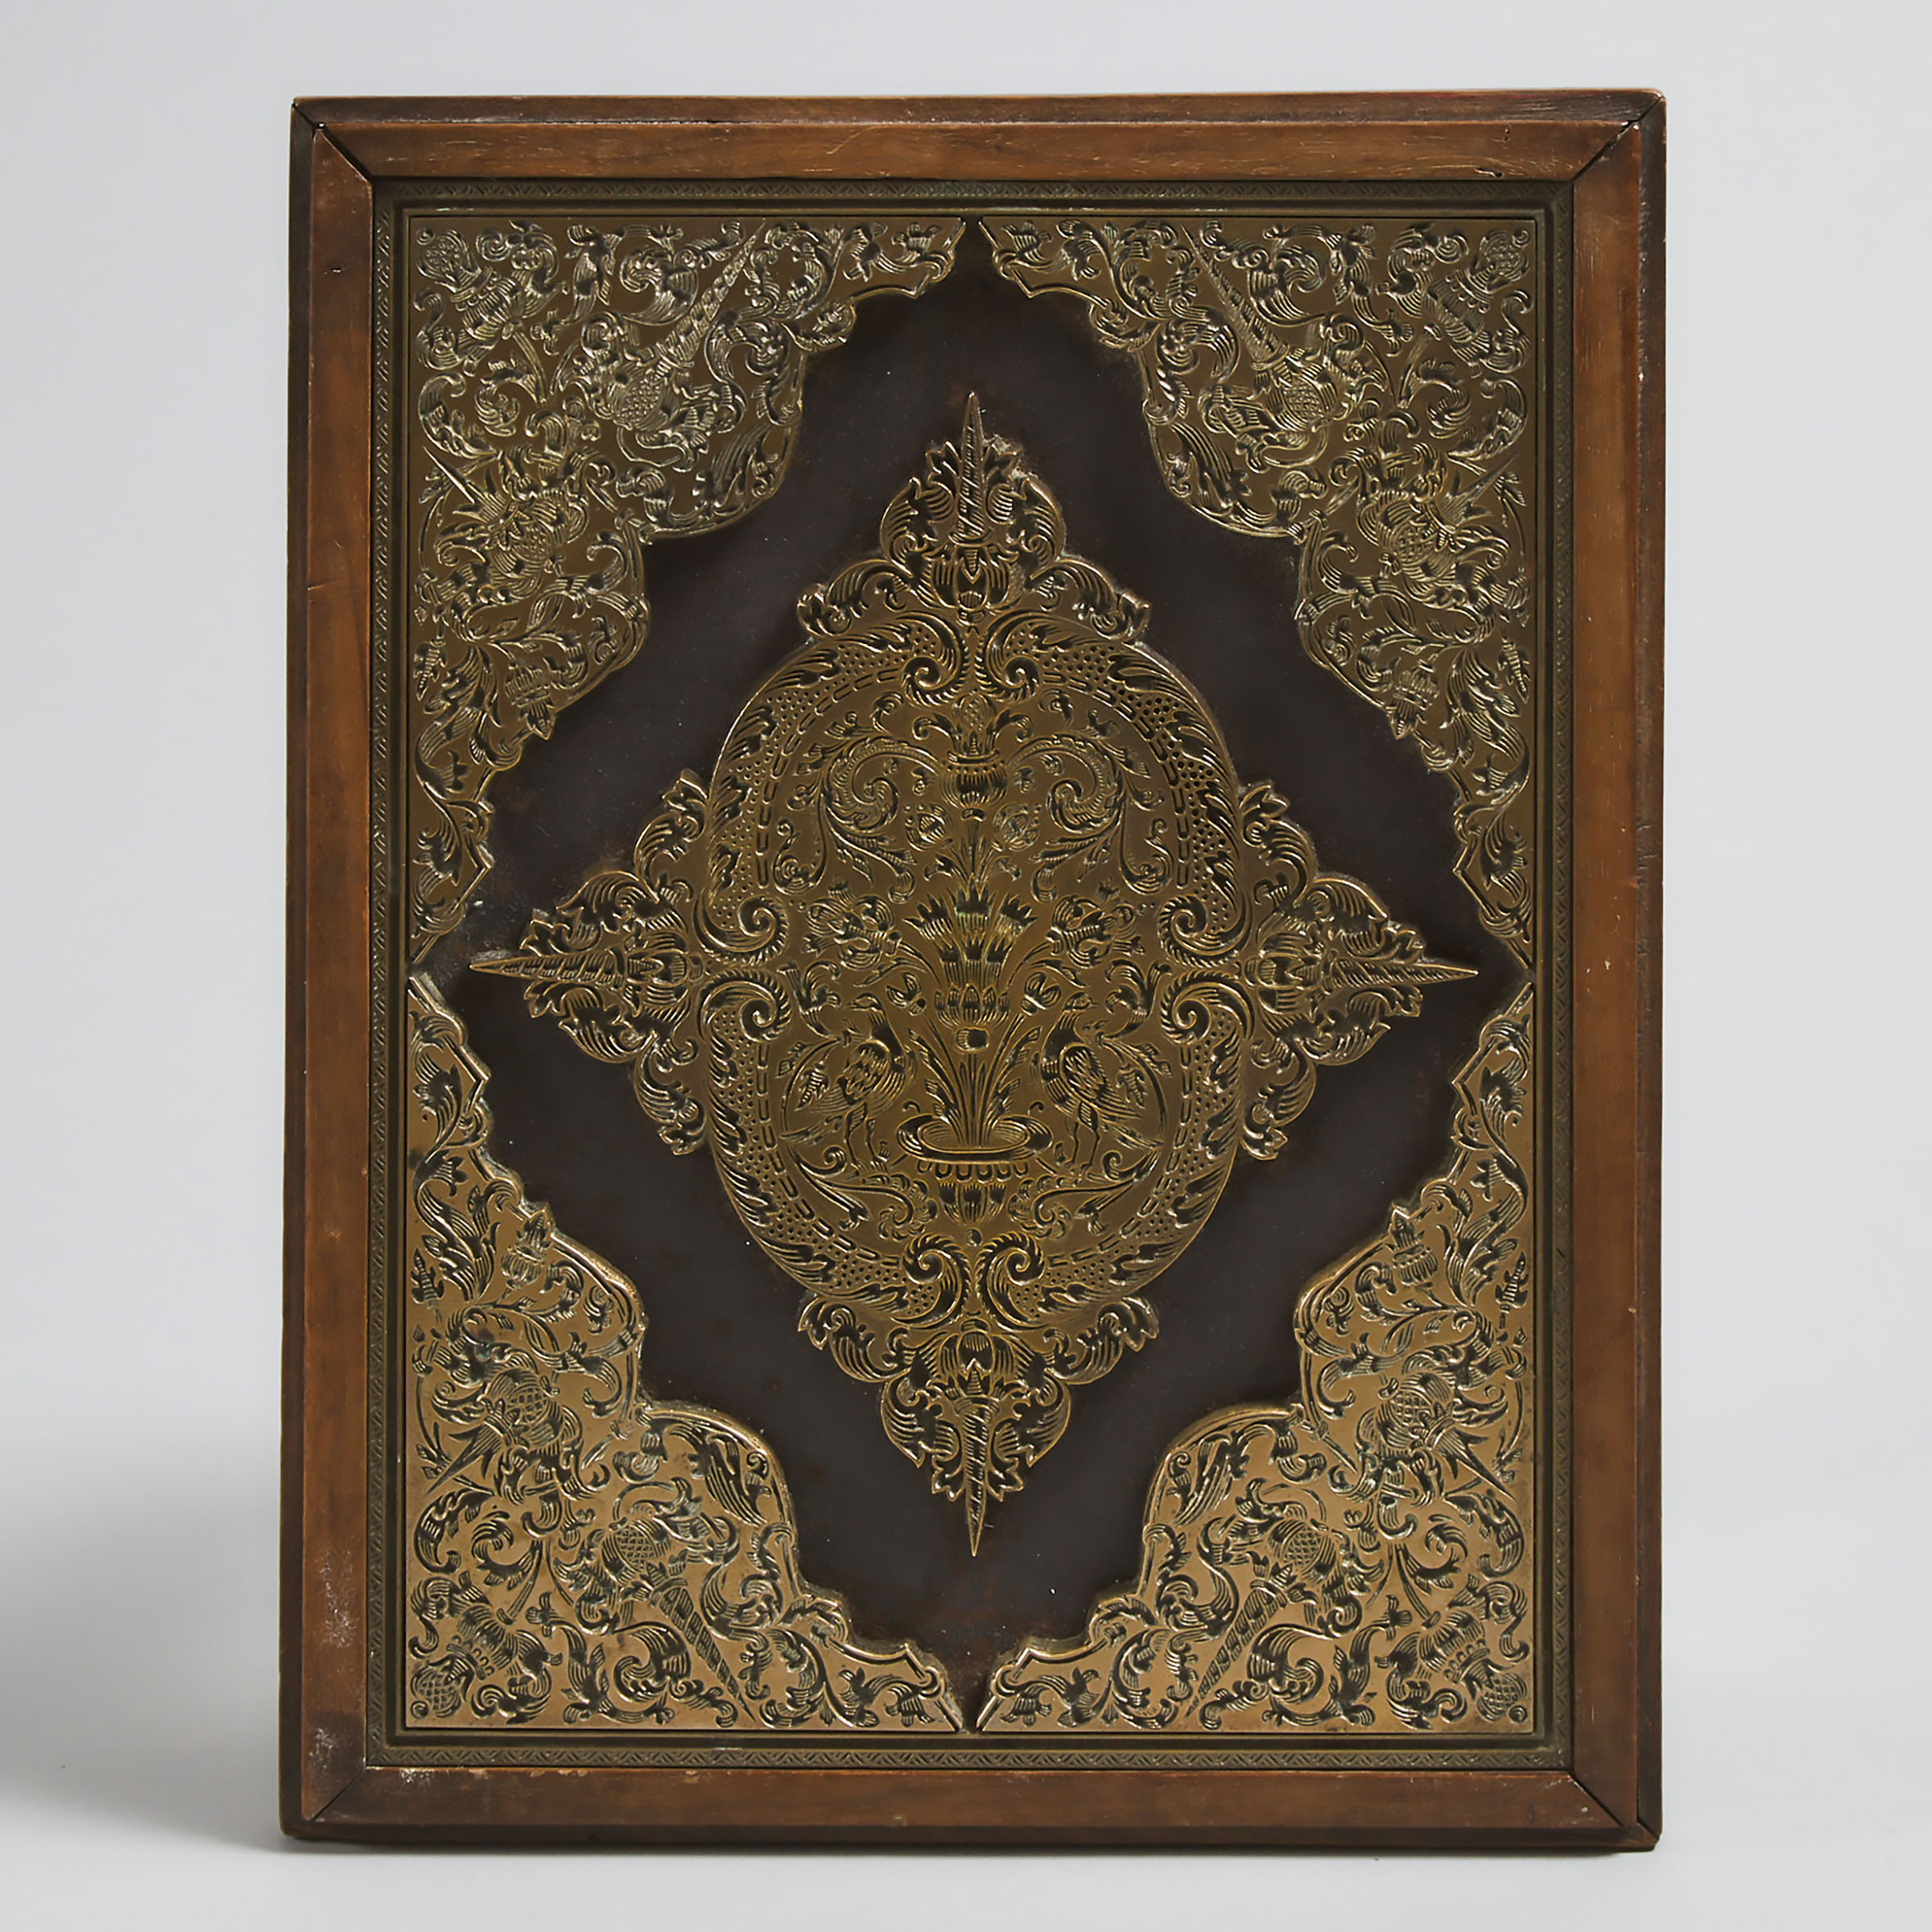 Book Binder's Gold Foil Stamping Plate, 19th century